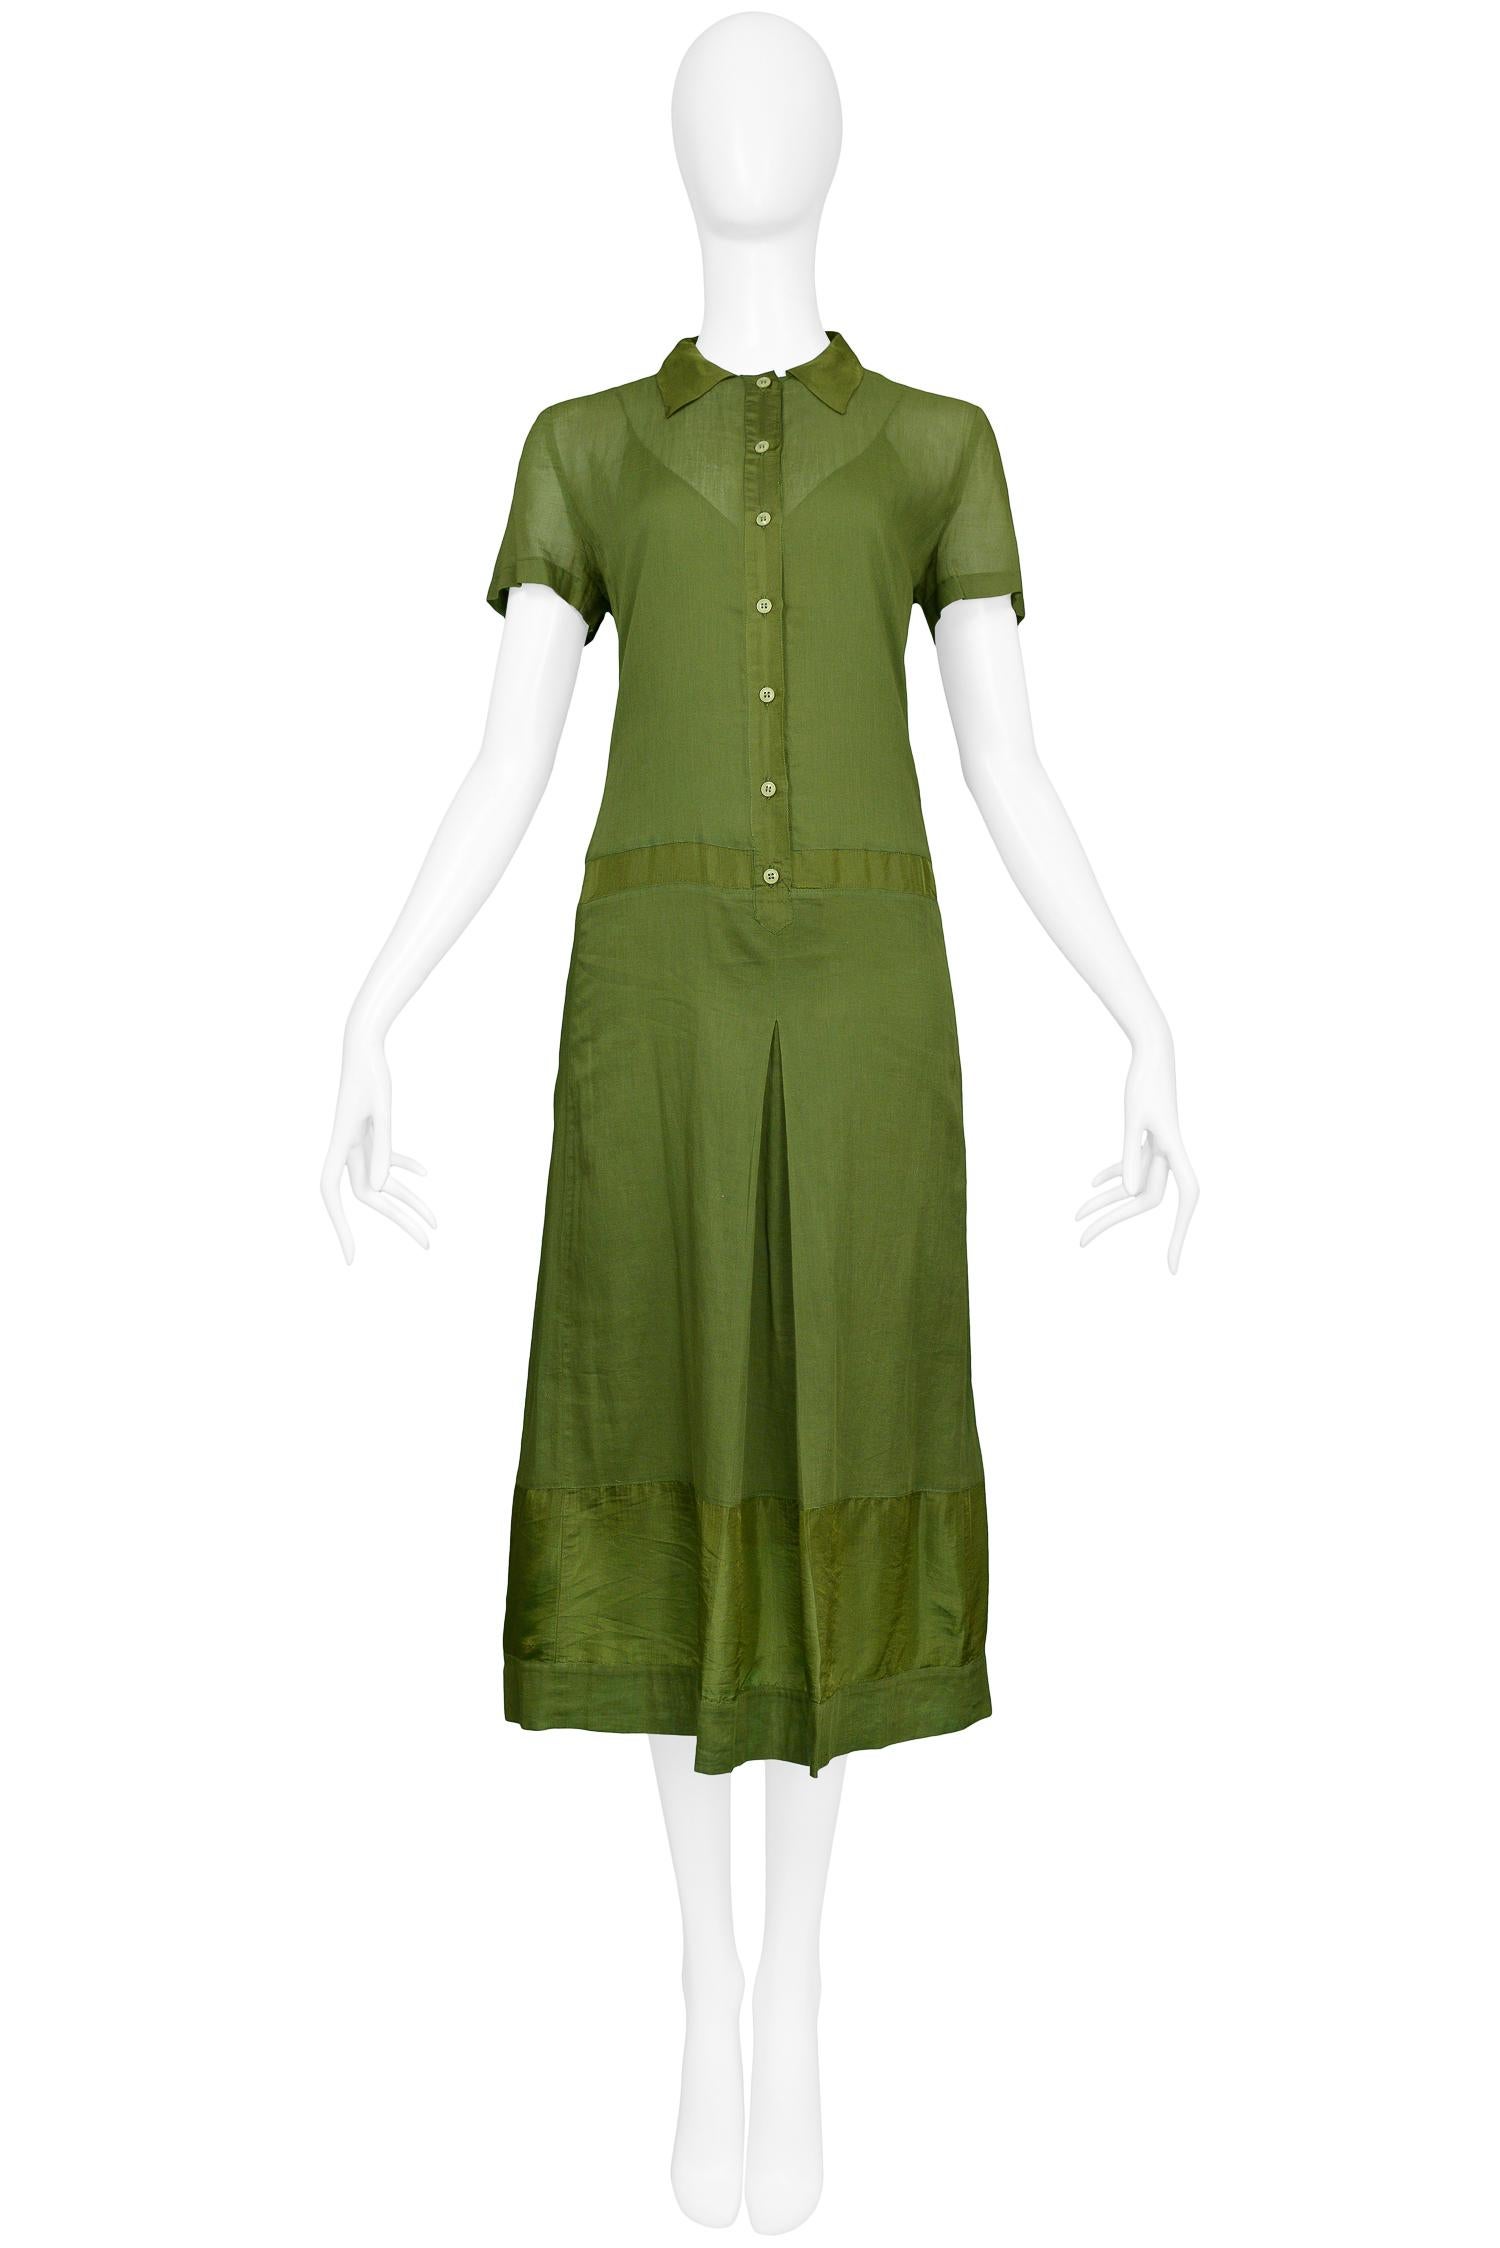 Vintage Miu Miu olive green cotton short sleeve button-front dress with silk accents at hem, waist, button panel & collar. The dress features a matching silk slip. From the 1999 Collection. 

Excellent Condition.

Size: 44